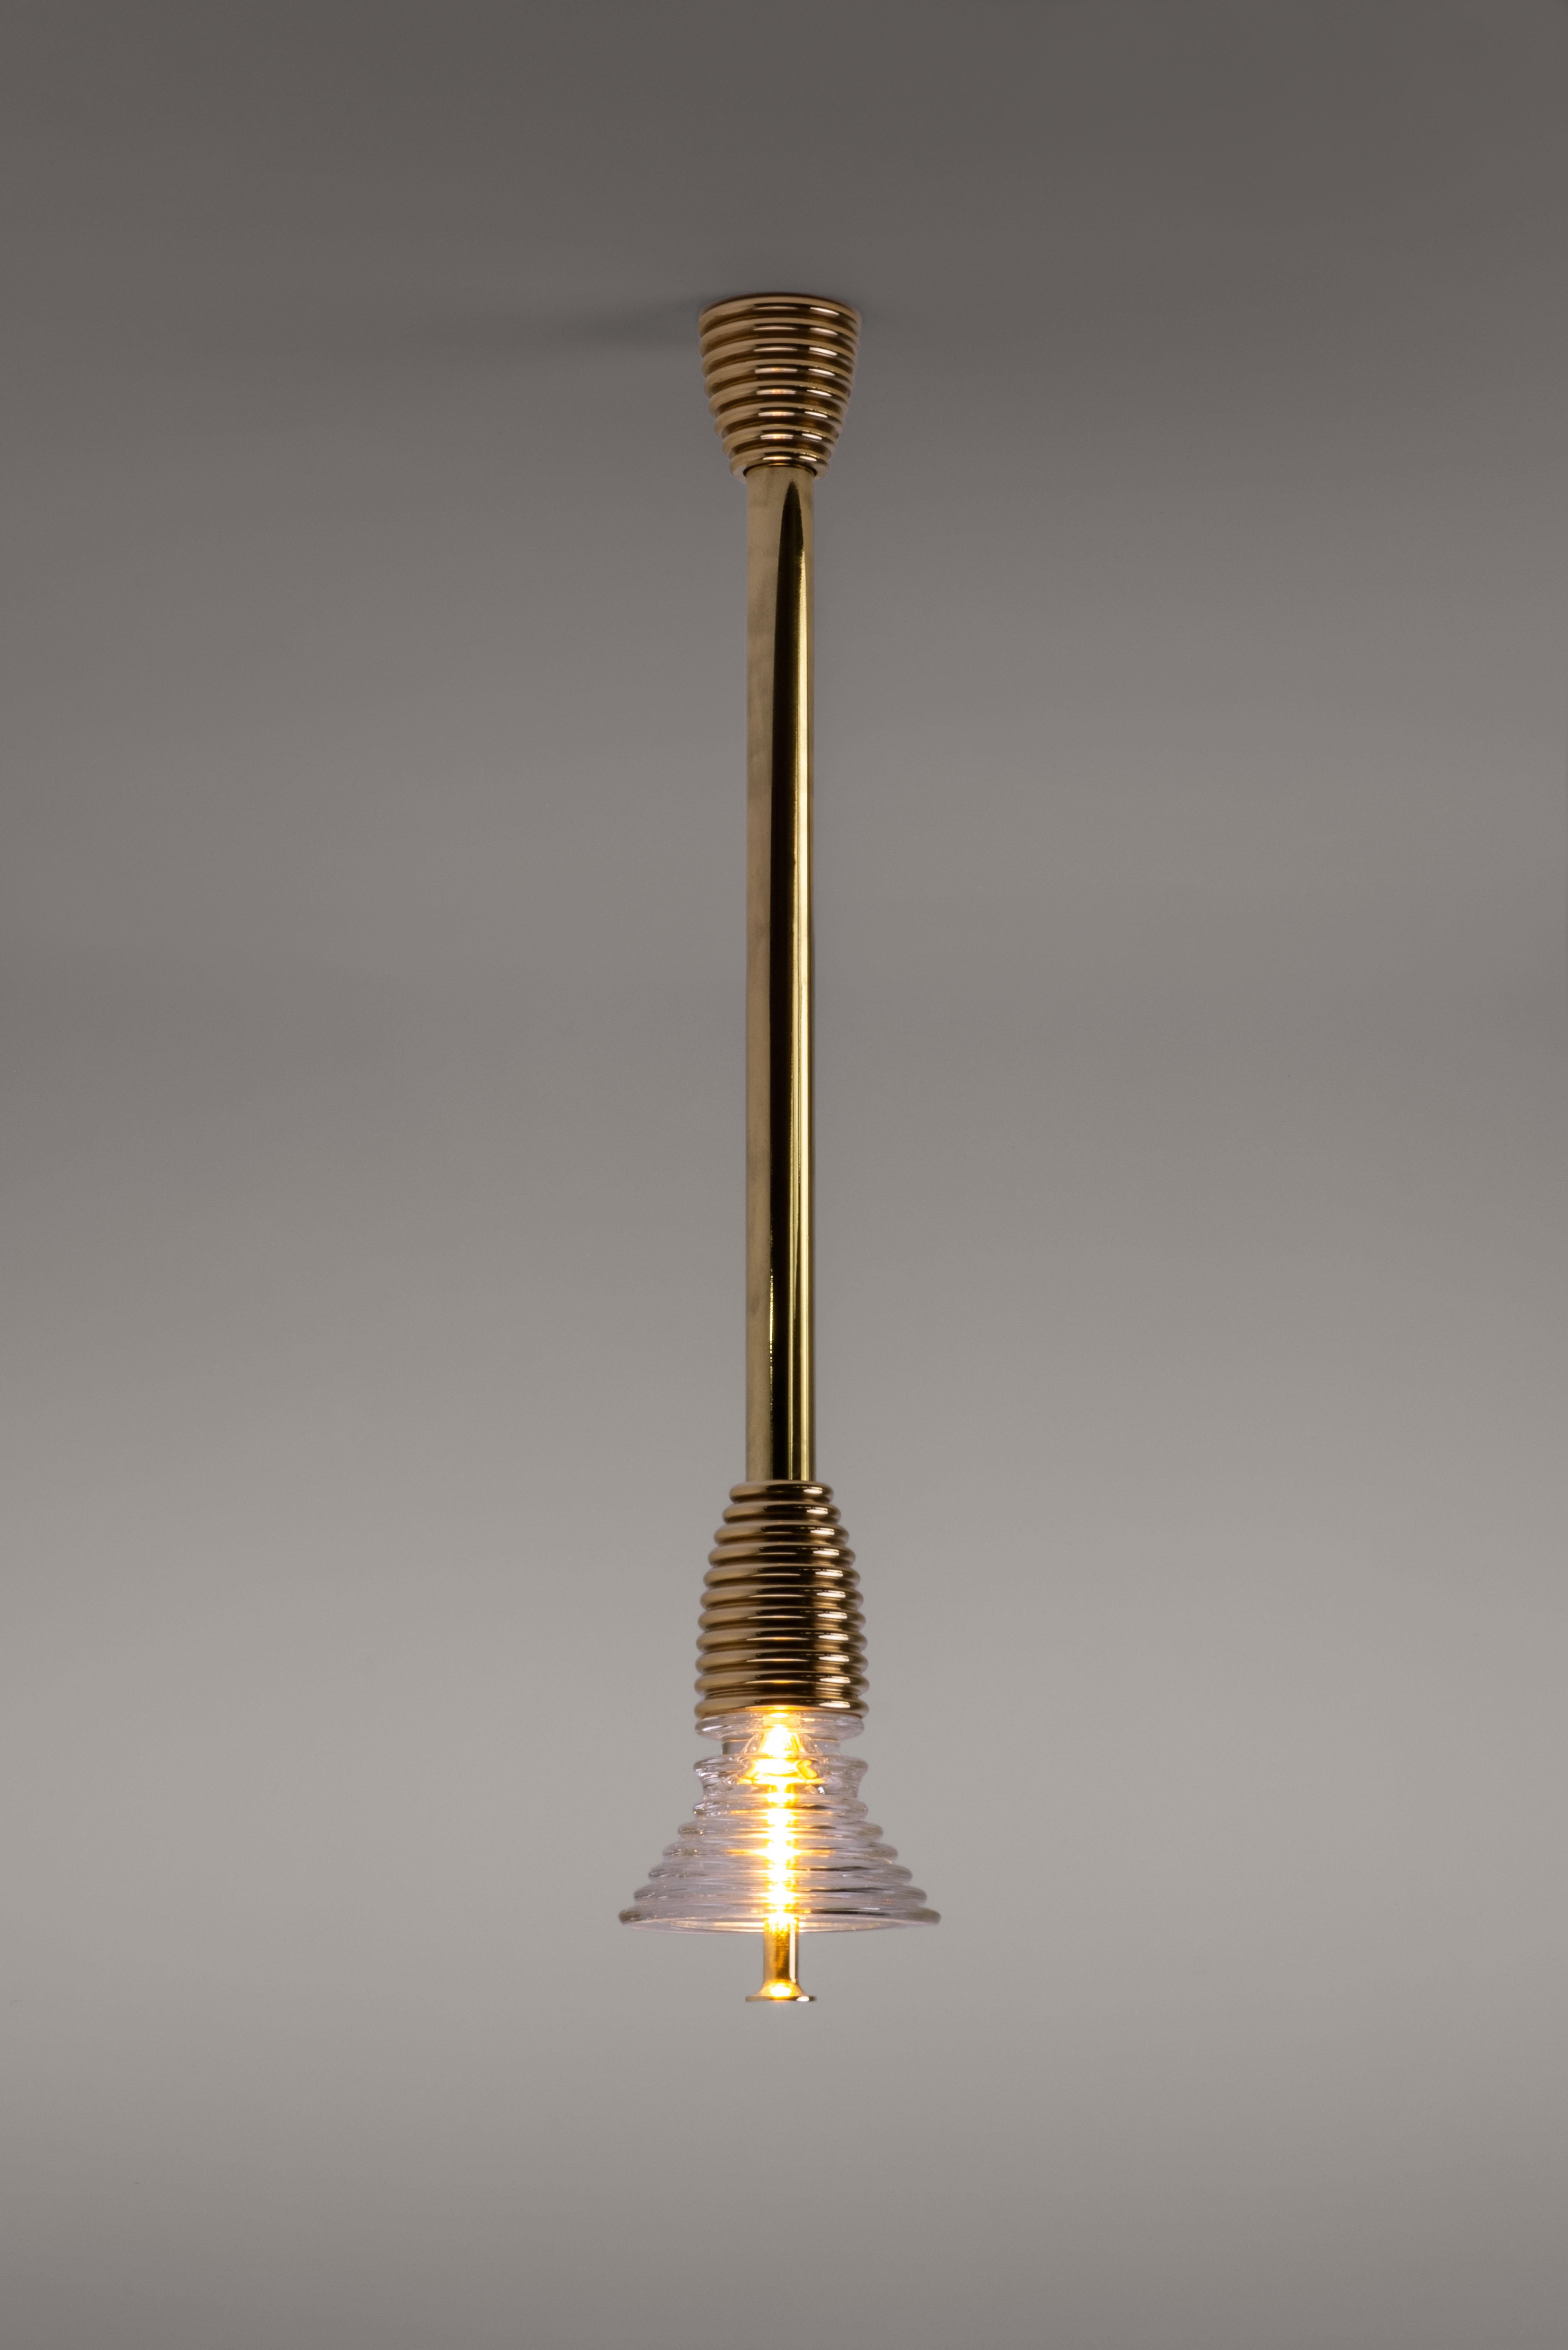 Insulator A Frosted Glass and Polished Brass Pendant Light by Novocastrian
Dimensions: Ø 14 x H 21 cm. Rod lenght: 85 or 125 cm.
Materials: Frosted glass and polished brass.  

All products are available in custom dimensions and finishes. Rods can